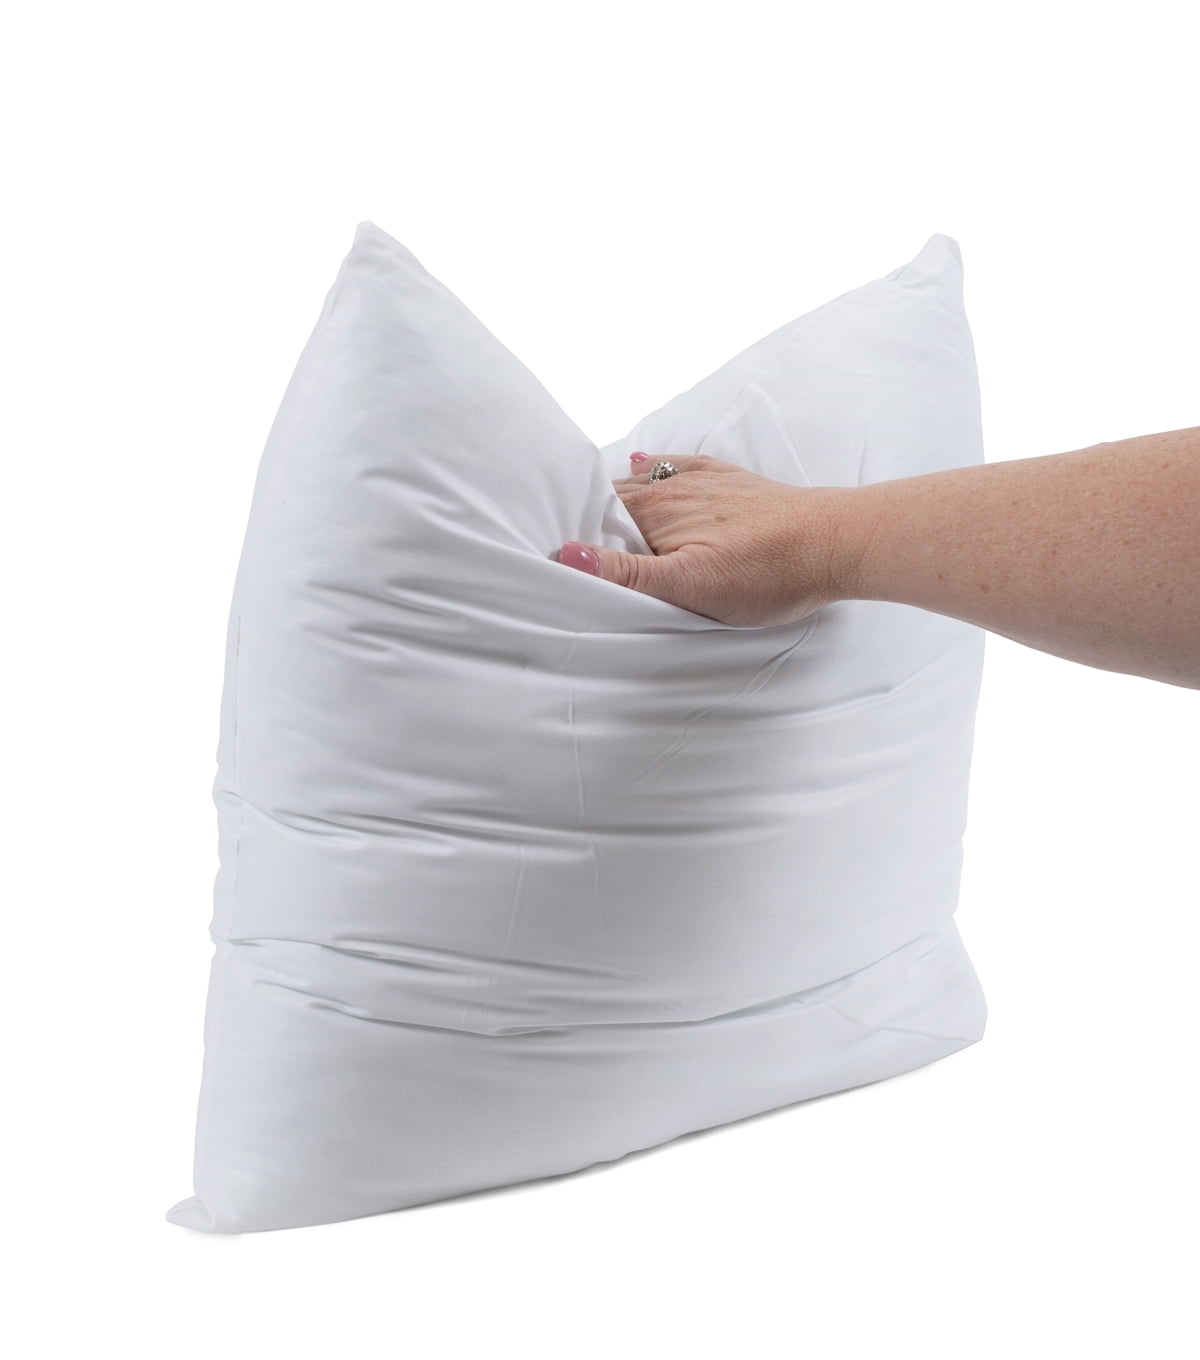 Fairfield Weather Soft Indoor/Outdoor Pillow, Size: 18 inch x 18 inch